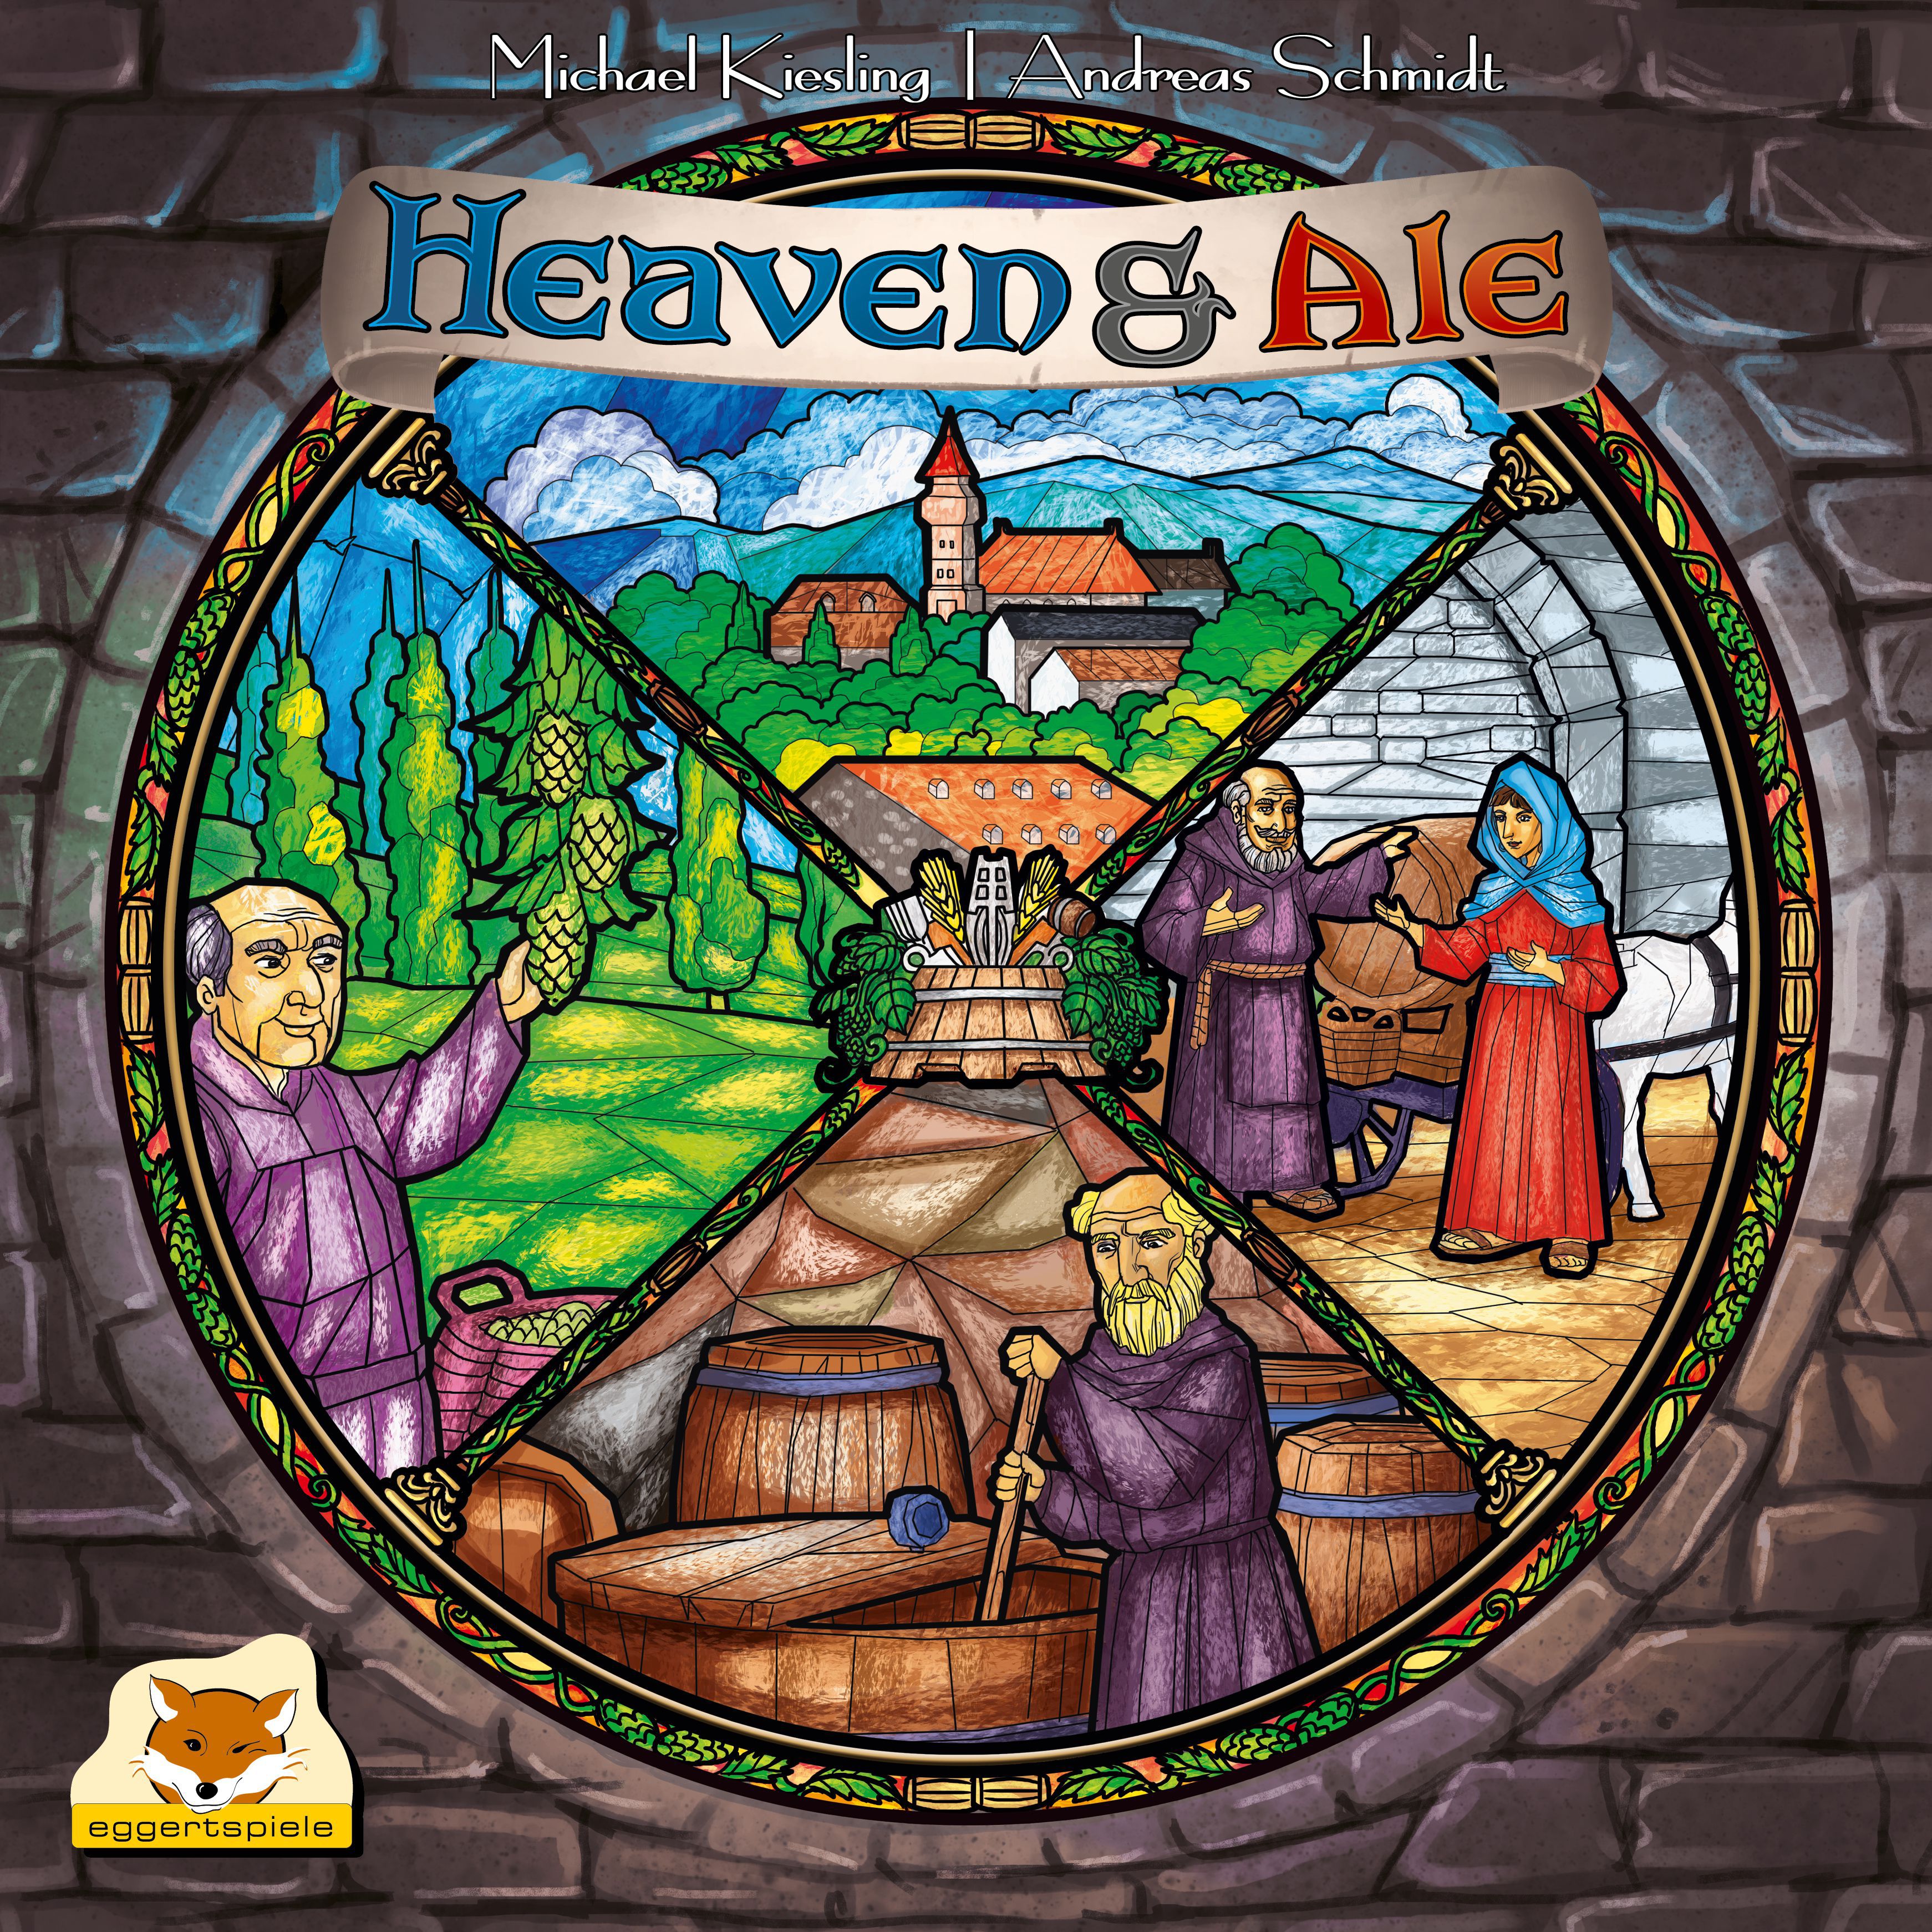 Cover art for the game Heaven & Ale showing a stained glass window of monks brewing beer.